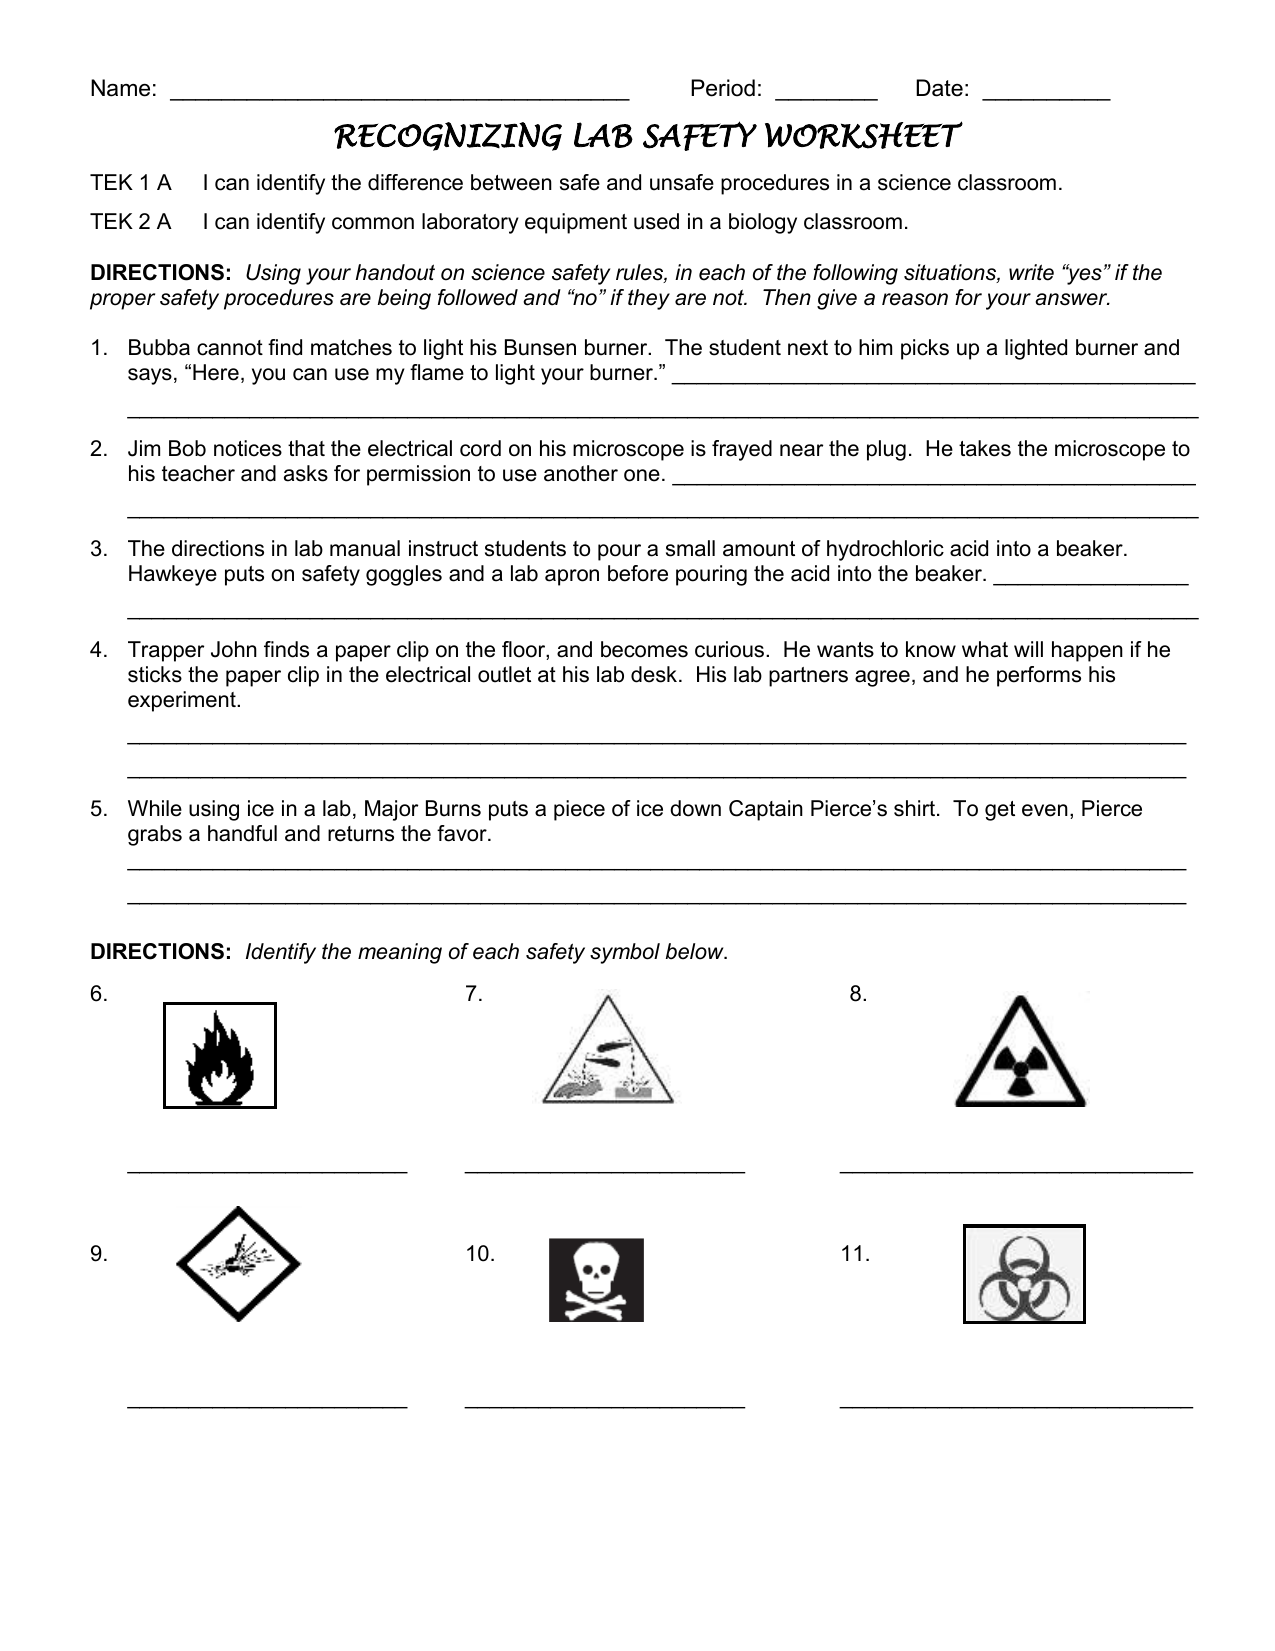 Lab Safety Worksheet 11 With Regard To Lab Safety Worksheet Answers